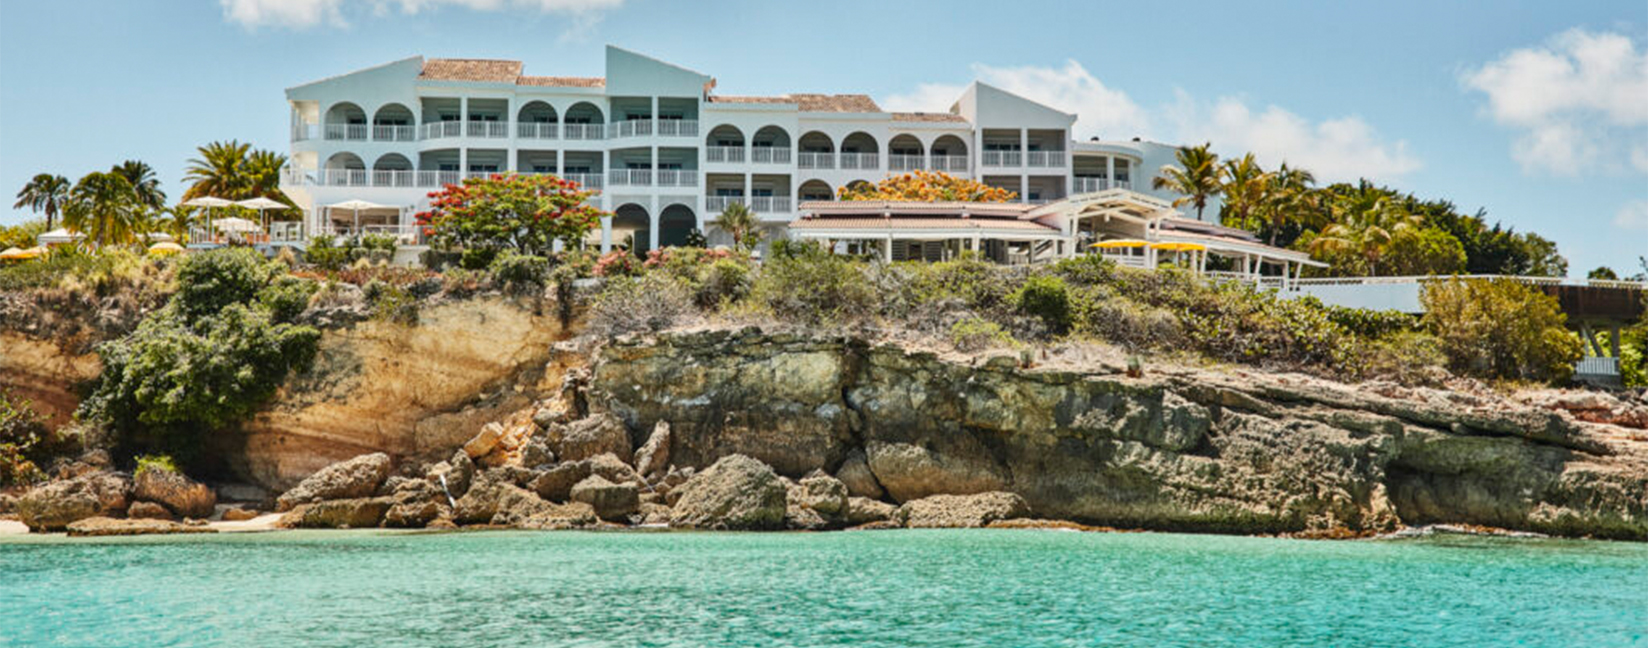 Anguilla Resorts for Families